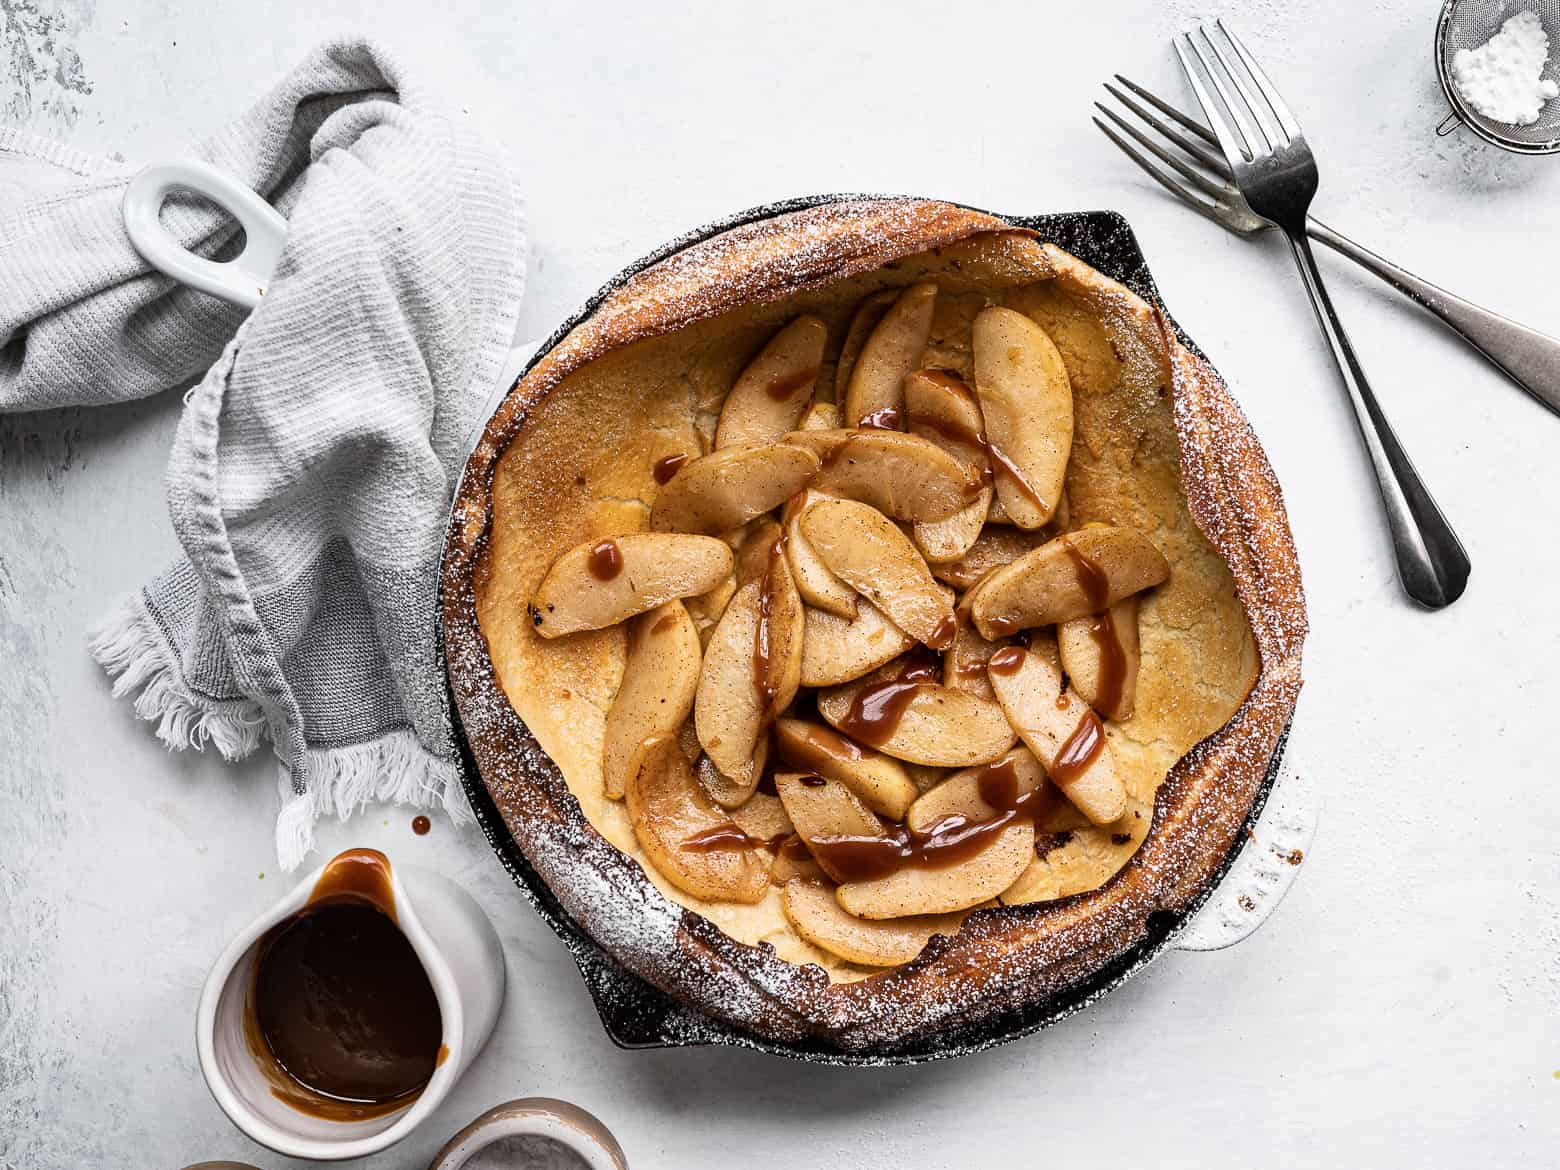 Dutch baby topped with caramelized apples, icing sugar and caramel drizzle